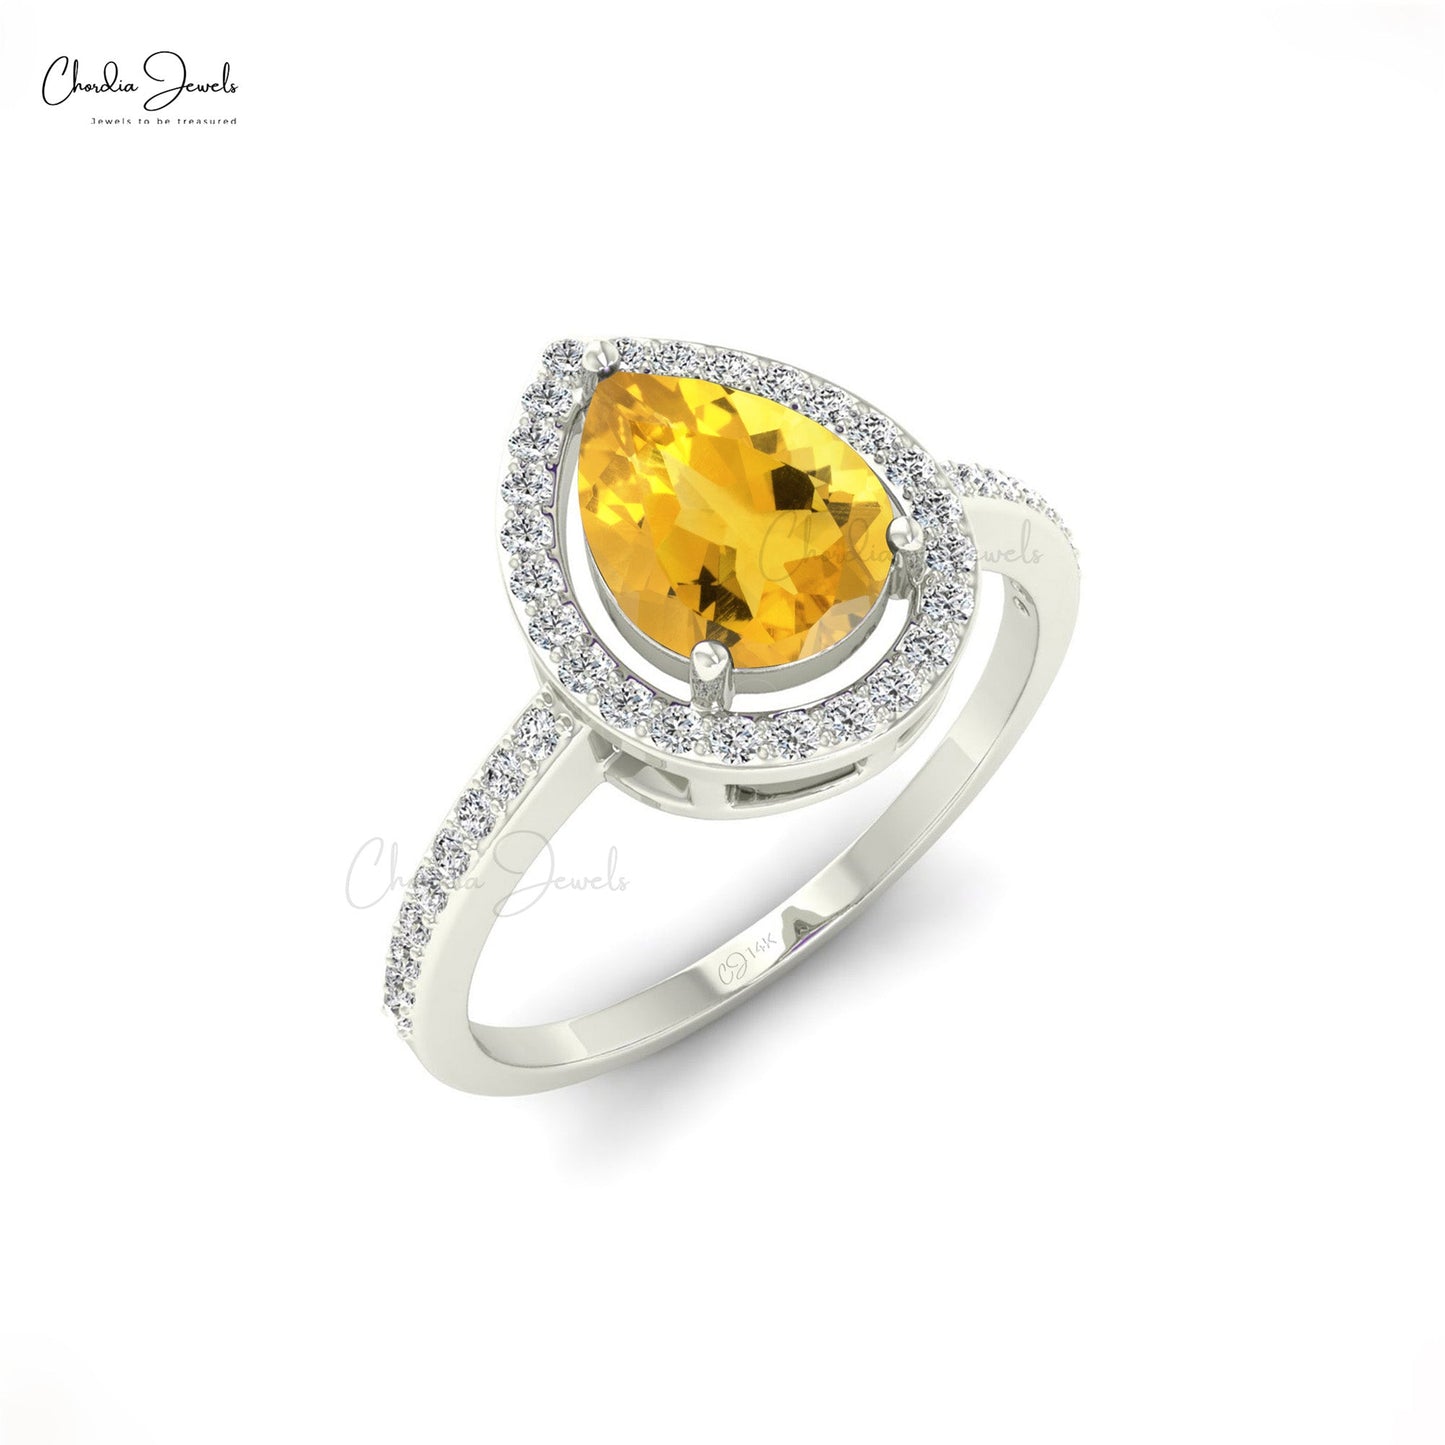 15.90 Carats Citrine, Diamond and 18K Gold Ring - Fine Jewelry by Tamsen Z